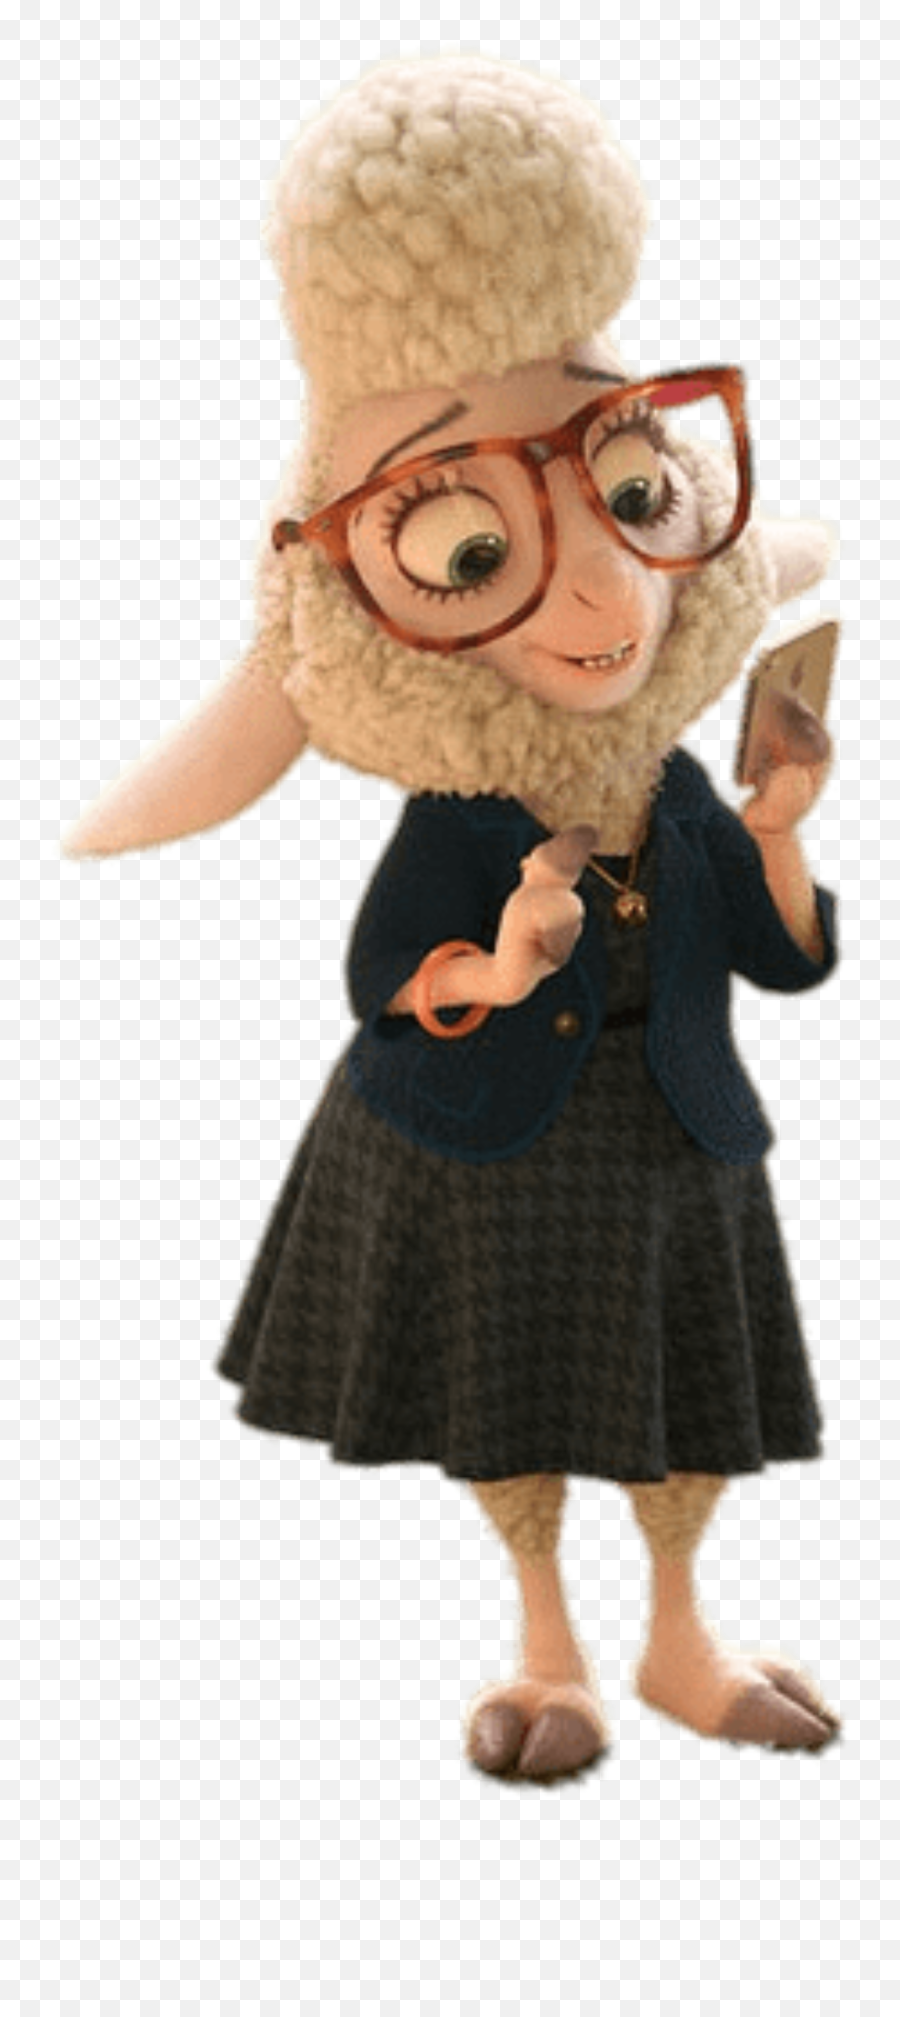 Zootopia - Png Imagens Png Dawn Bellwether Png Transparente Assistant Mayor Bellwether Zootopia,Zootopia Transparent